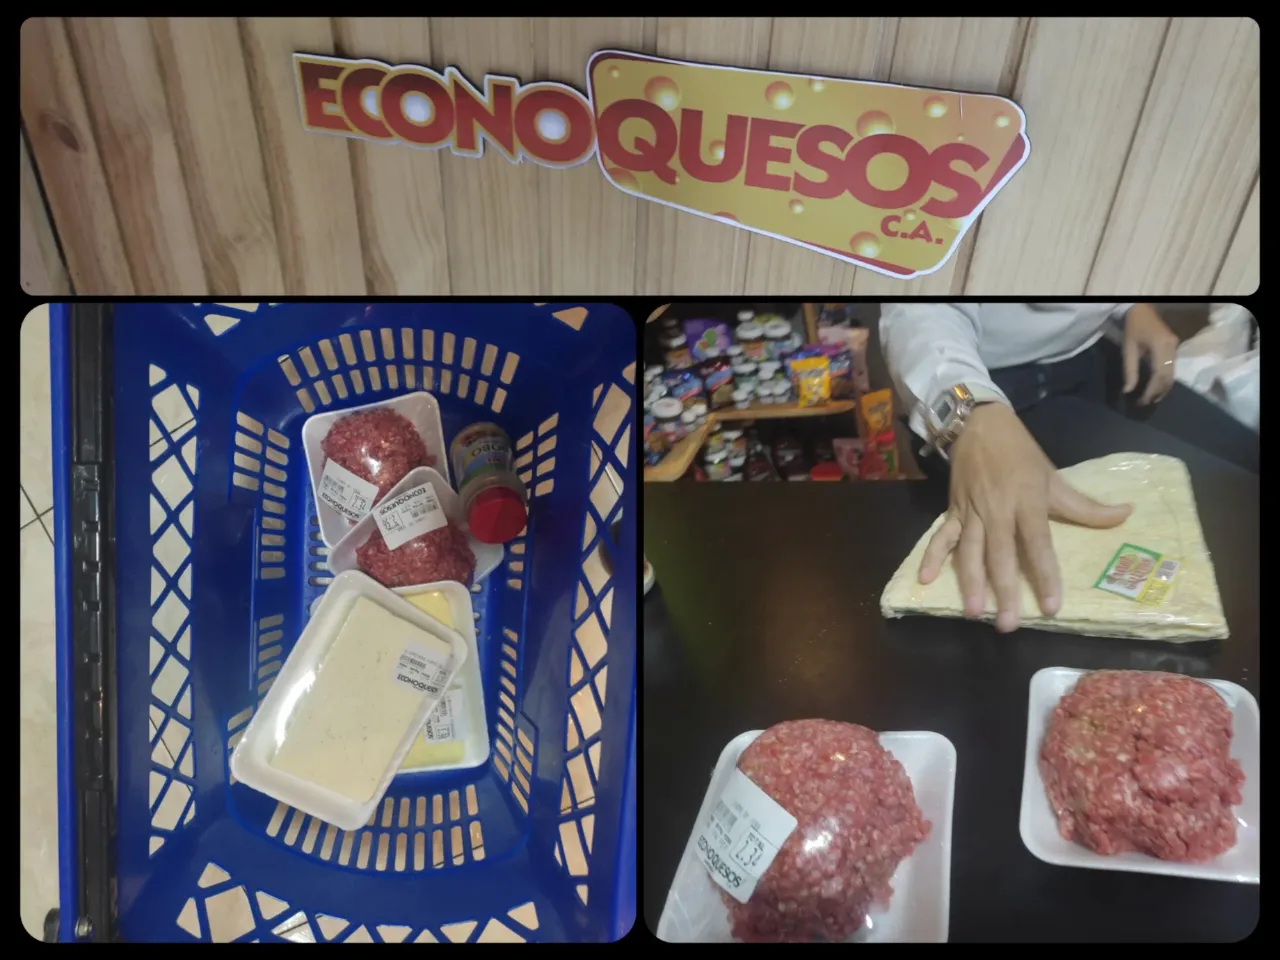  [Eng-Esp]  Buying quality food for my family with HBD! 🛒✨ Cryptoadoption in Sucre! ❤️‍🔥